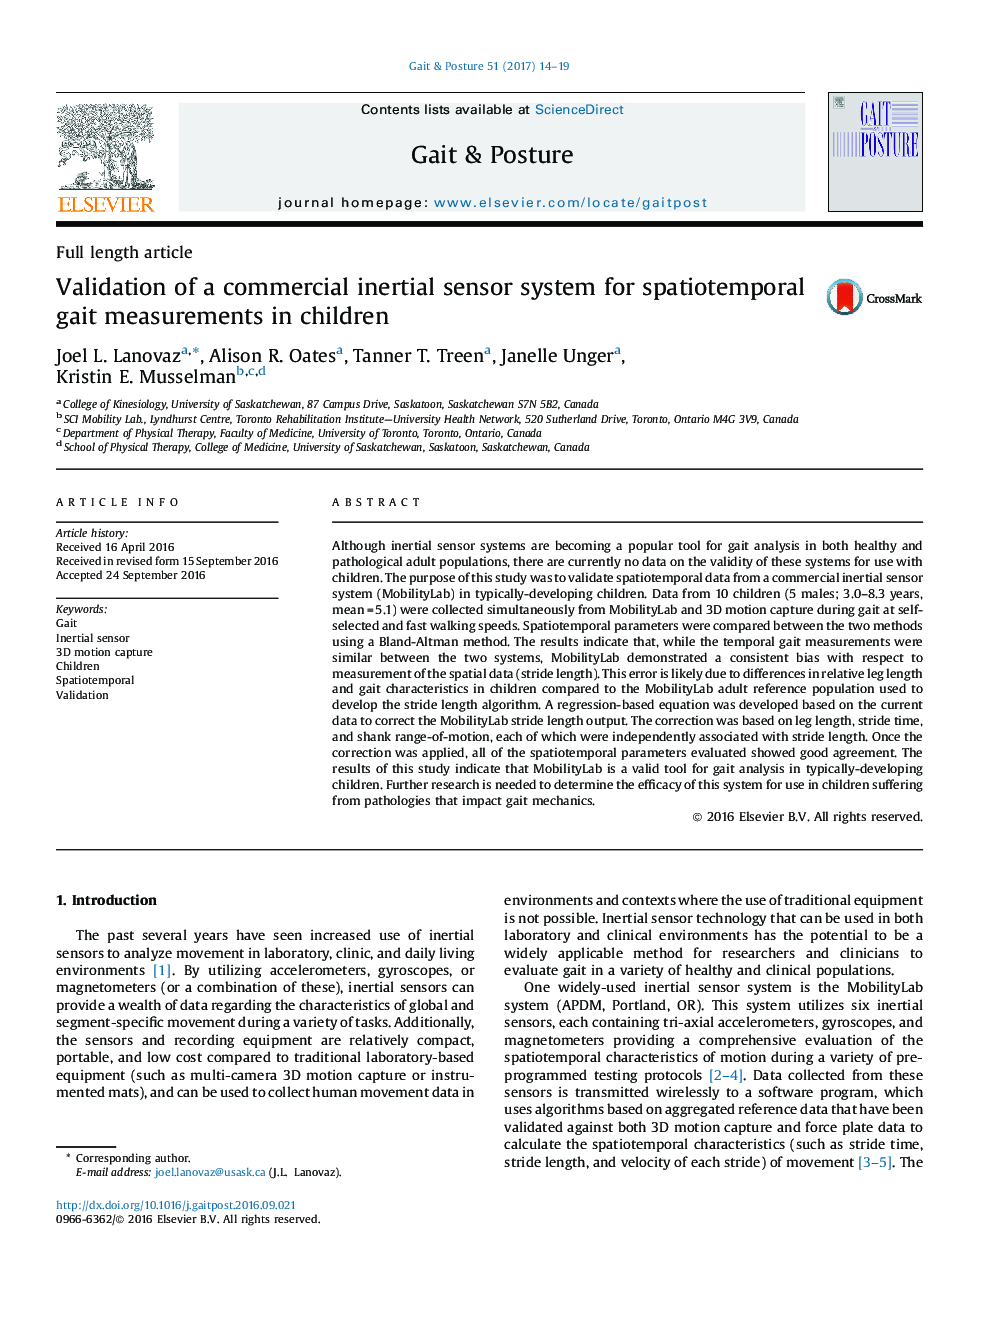 Validation of a commercial inertial sensor system for spatiotemporal gait measurements in children